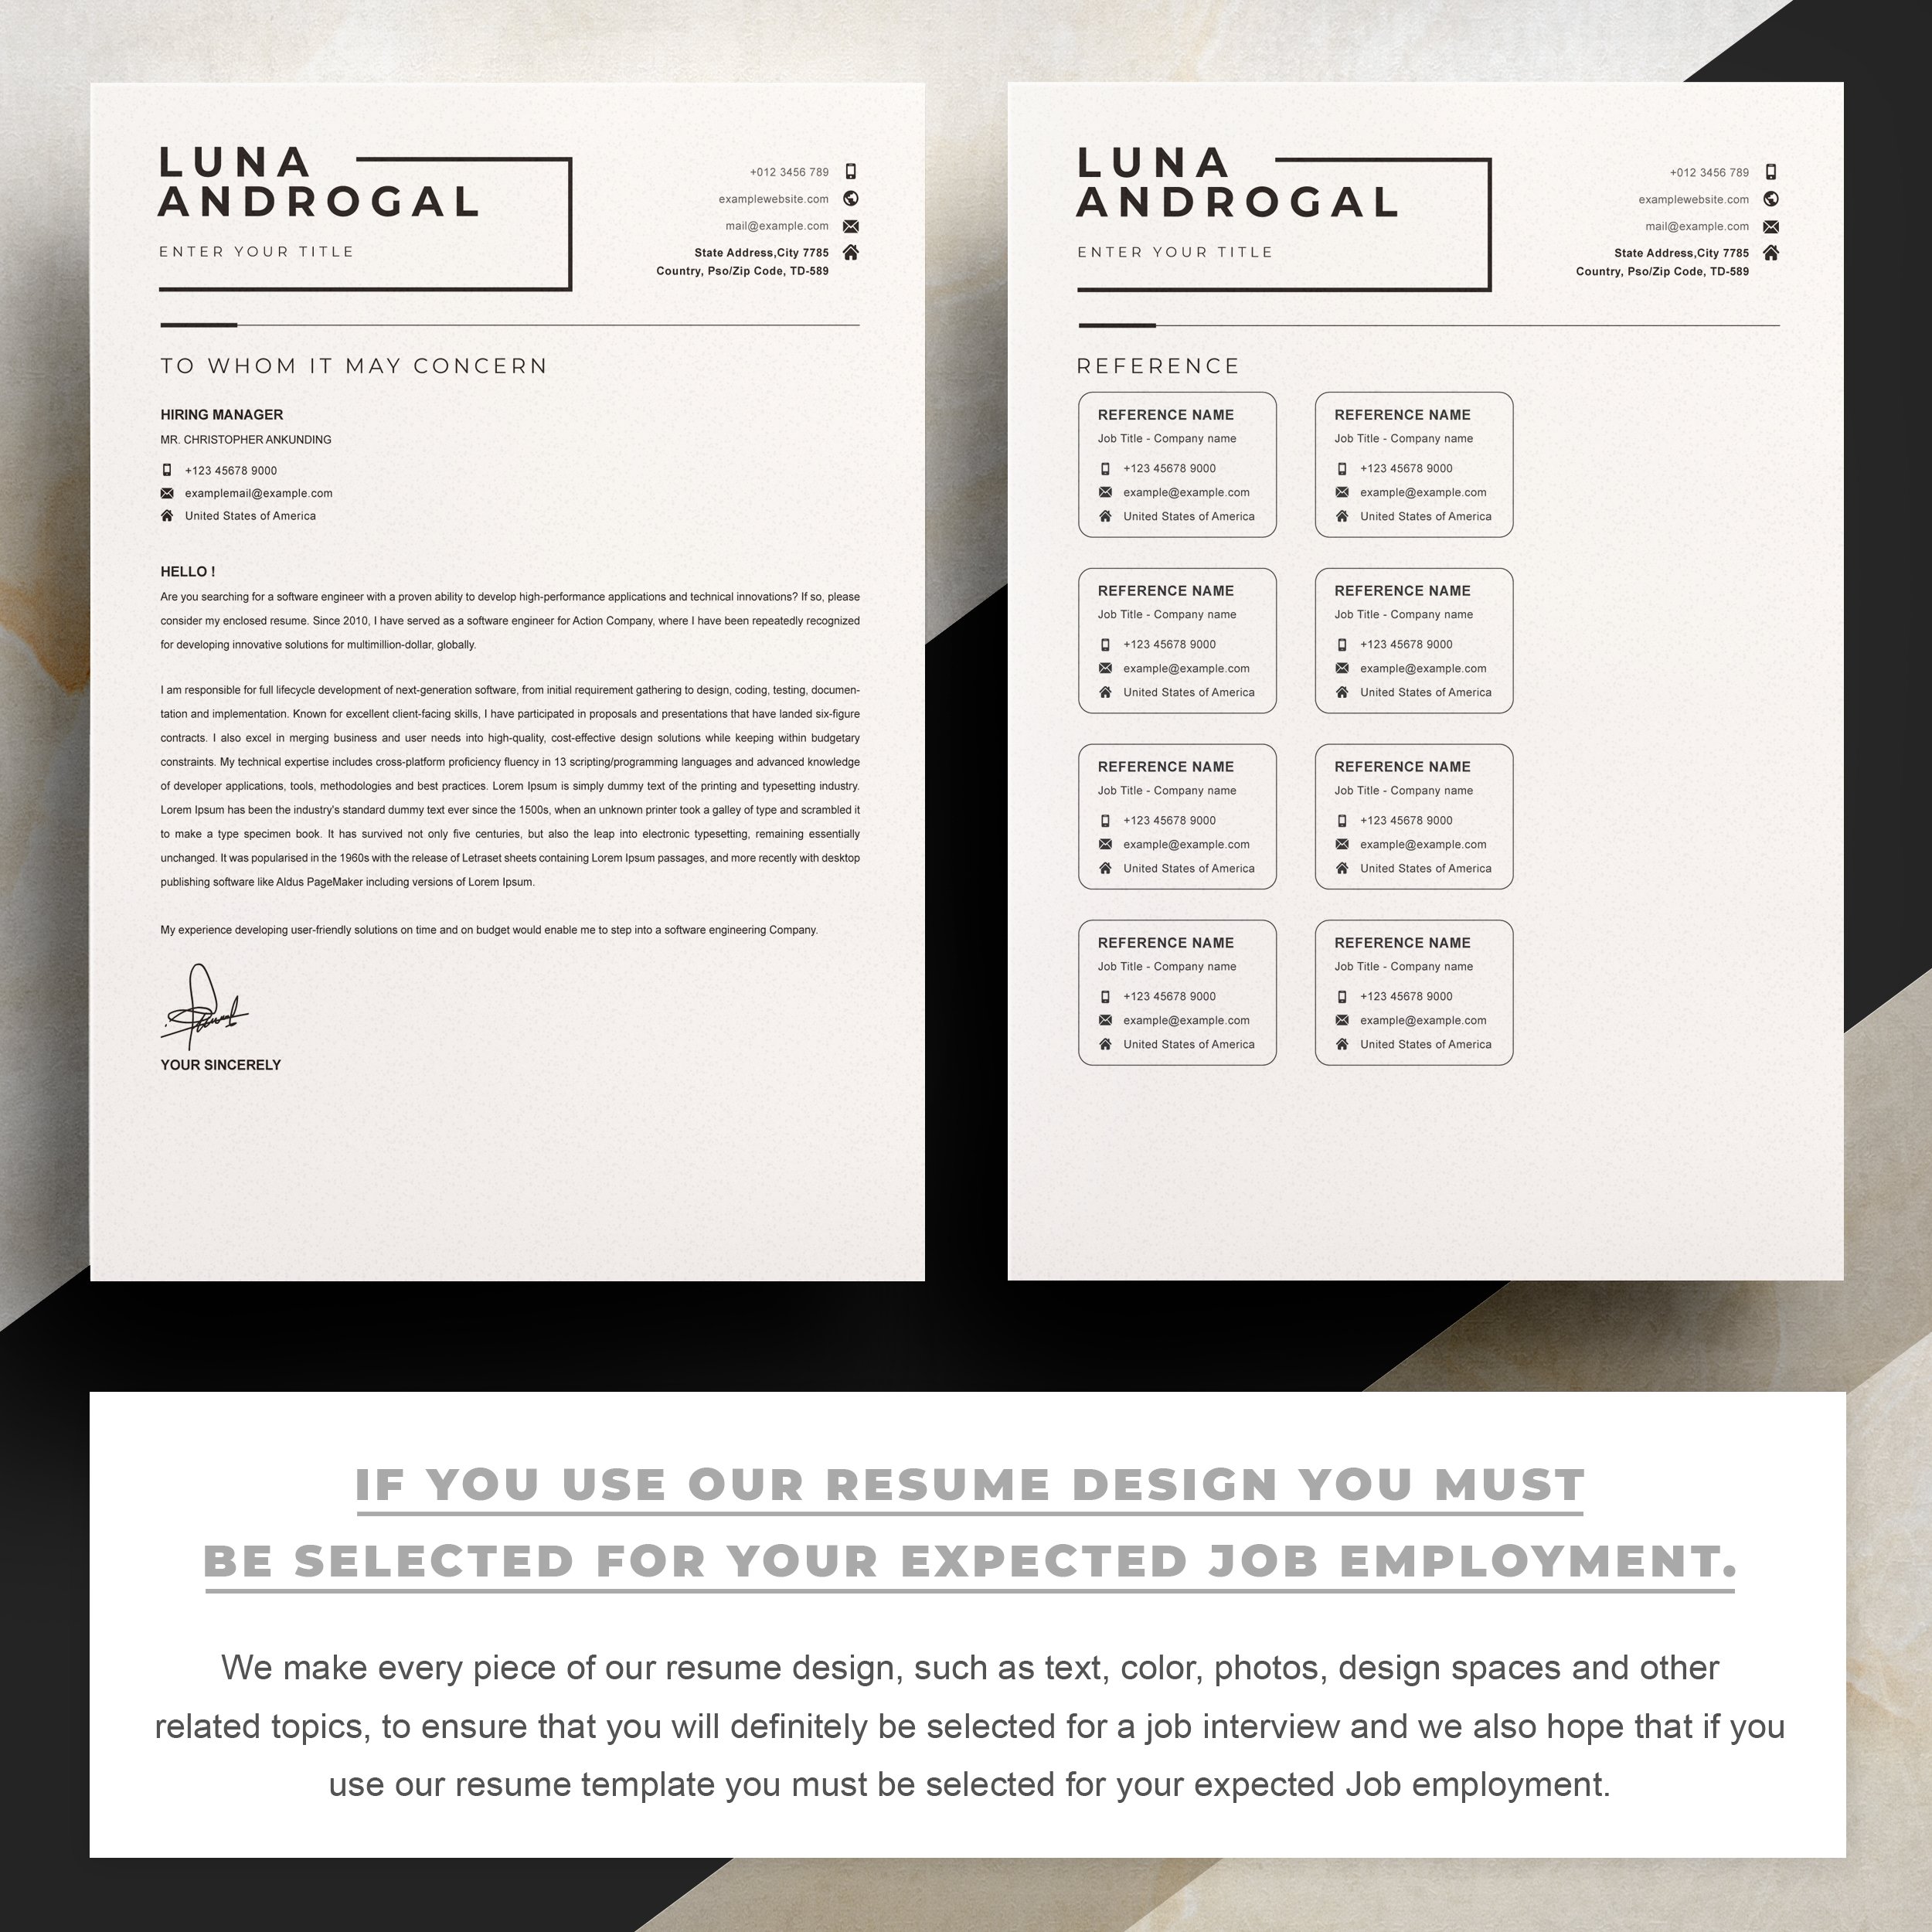 03 2 pages free resume design template 146